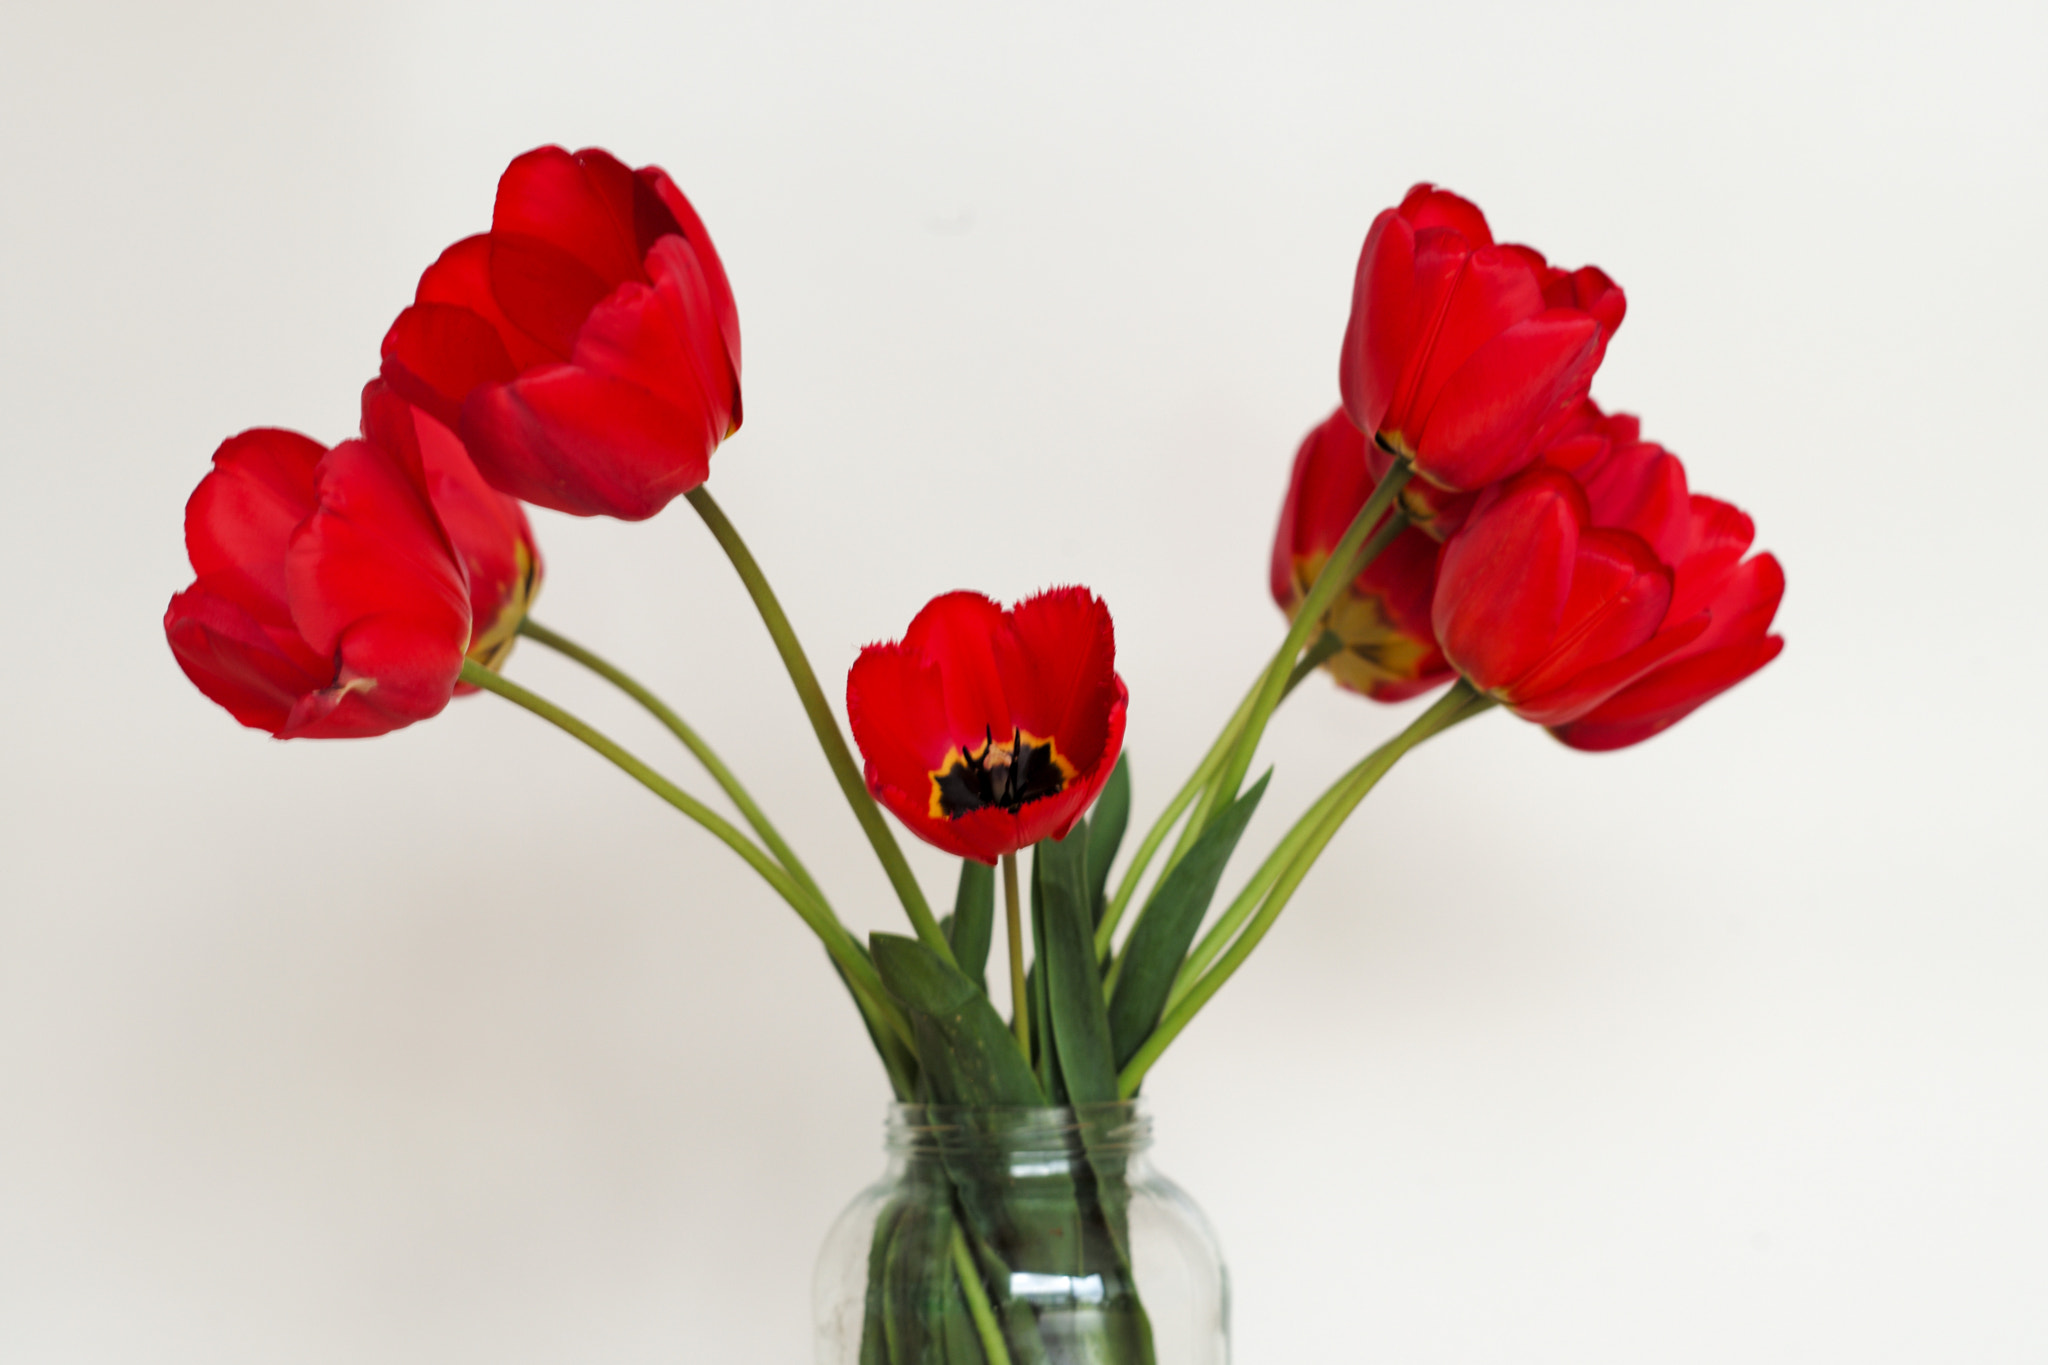 Leica APO-Summicron-M 75mm F2 ASPH sample photo. Tulips in a glass photography